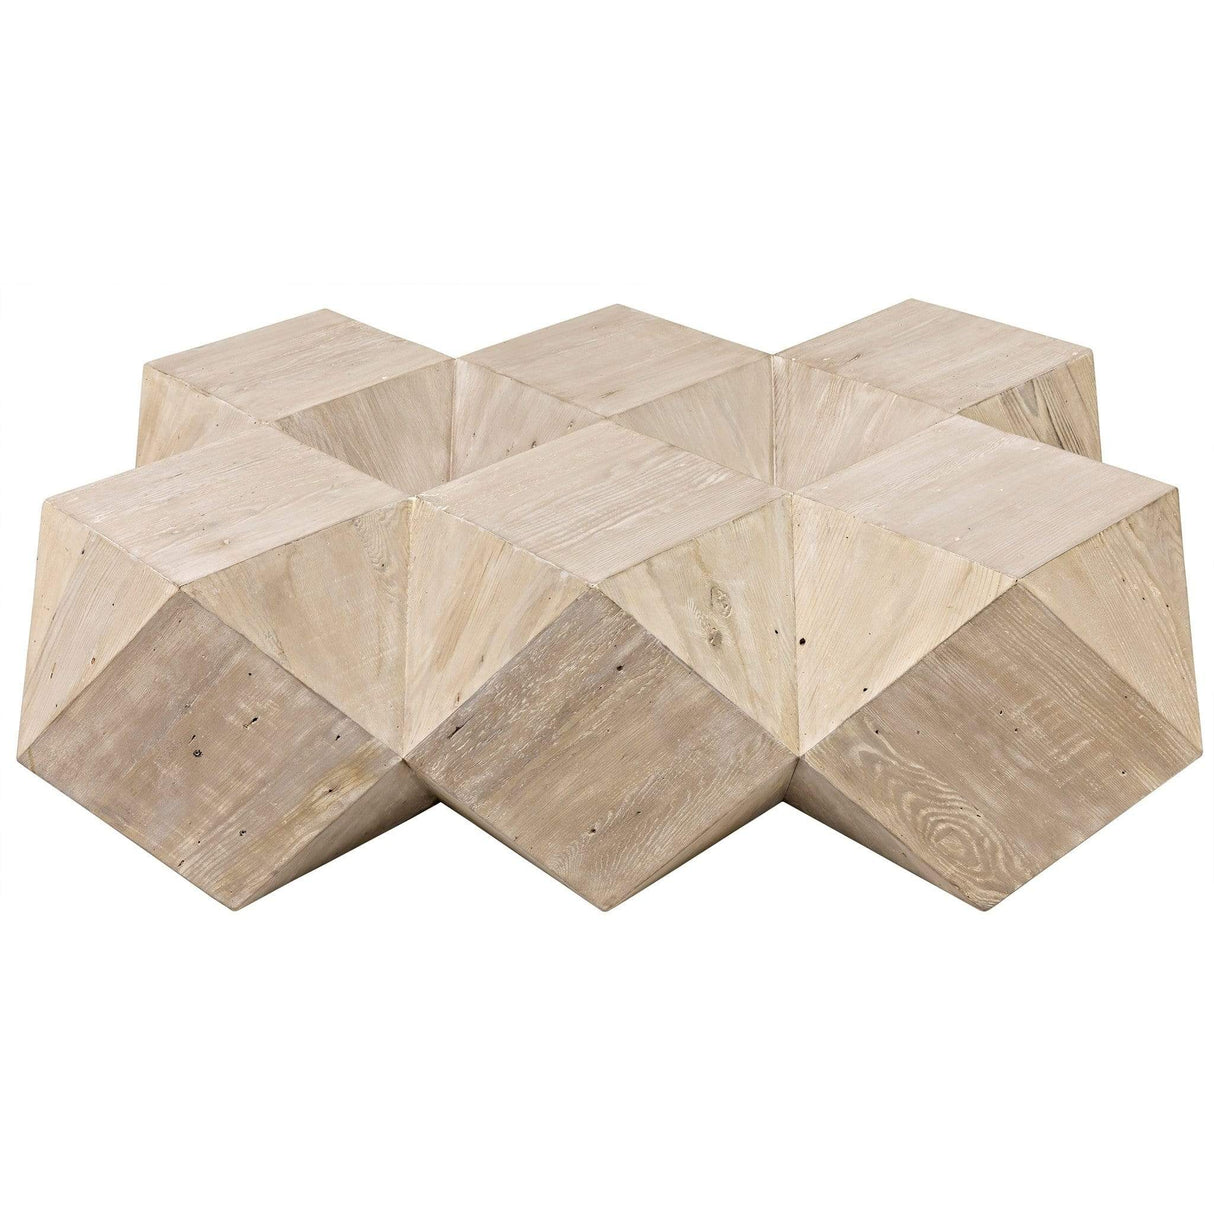 CFC Iconsahedron Coffee Table - Large Furniture cfc-OW322-L